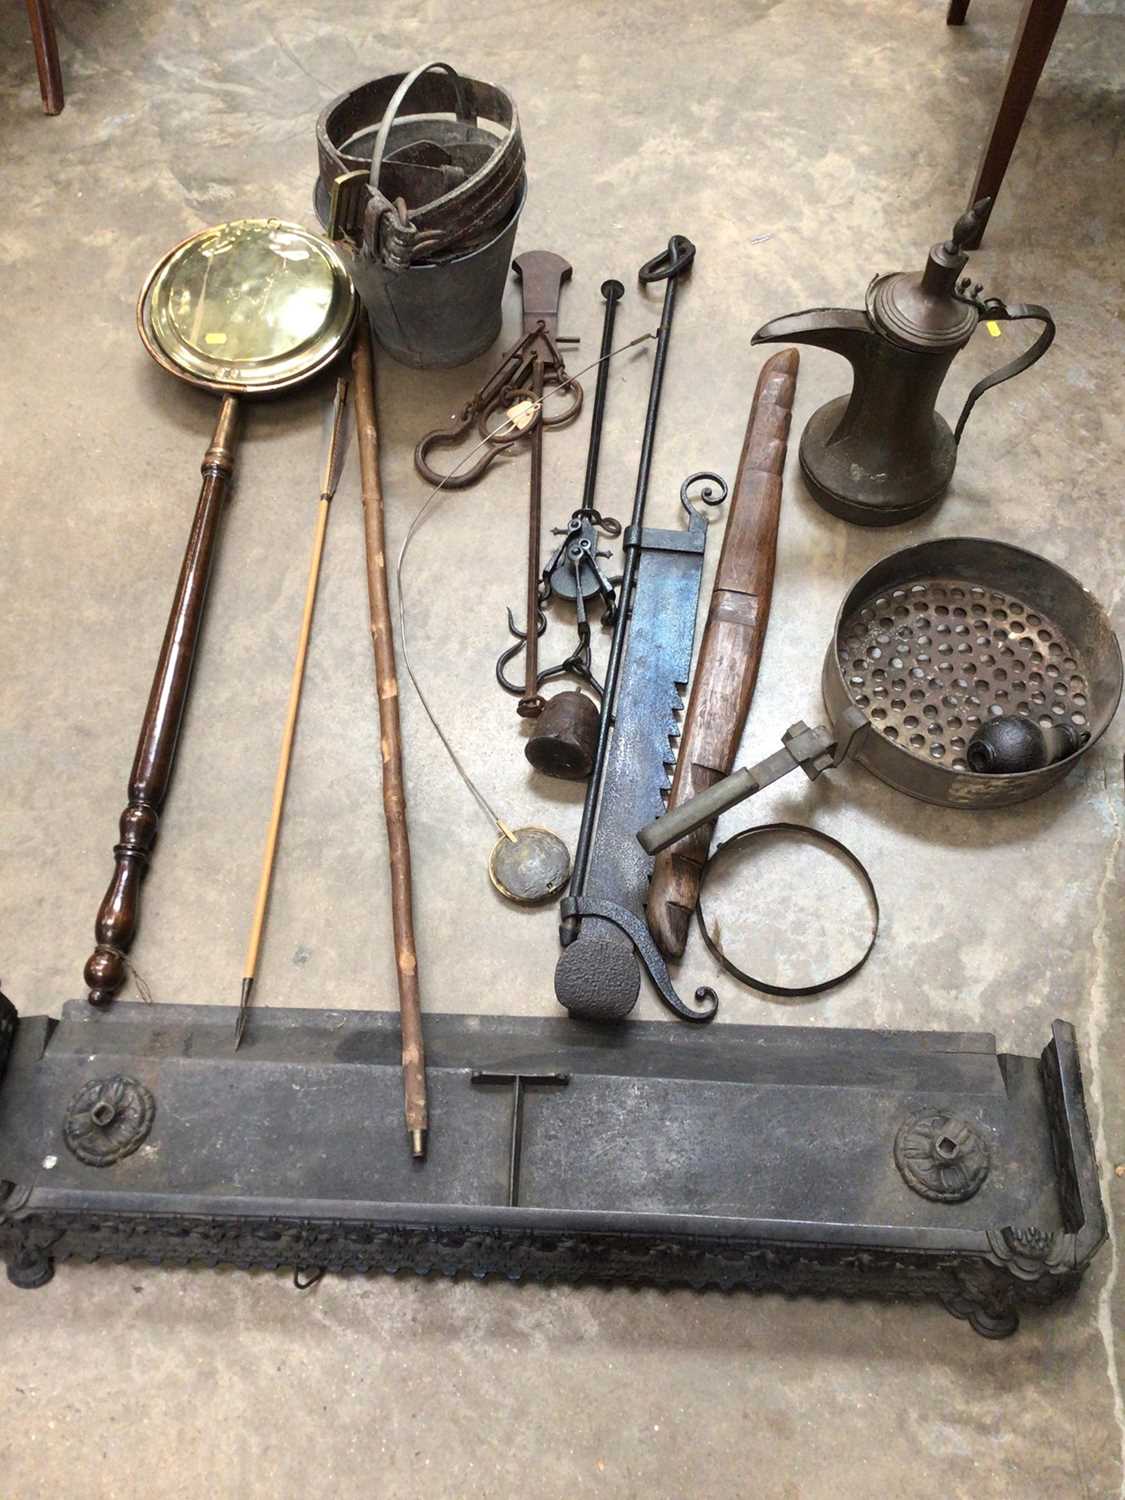 Sundry metalwares and other items, including a fender, Middle Eastern coffee pot, fireplace accessor